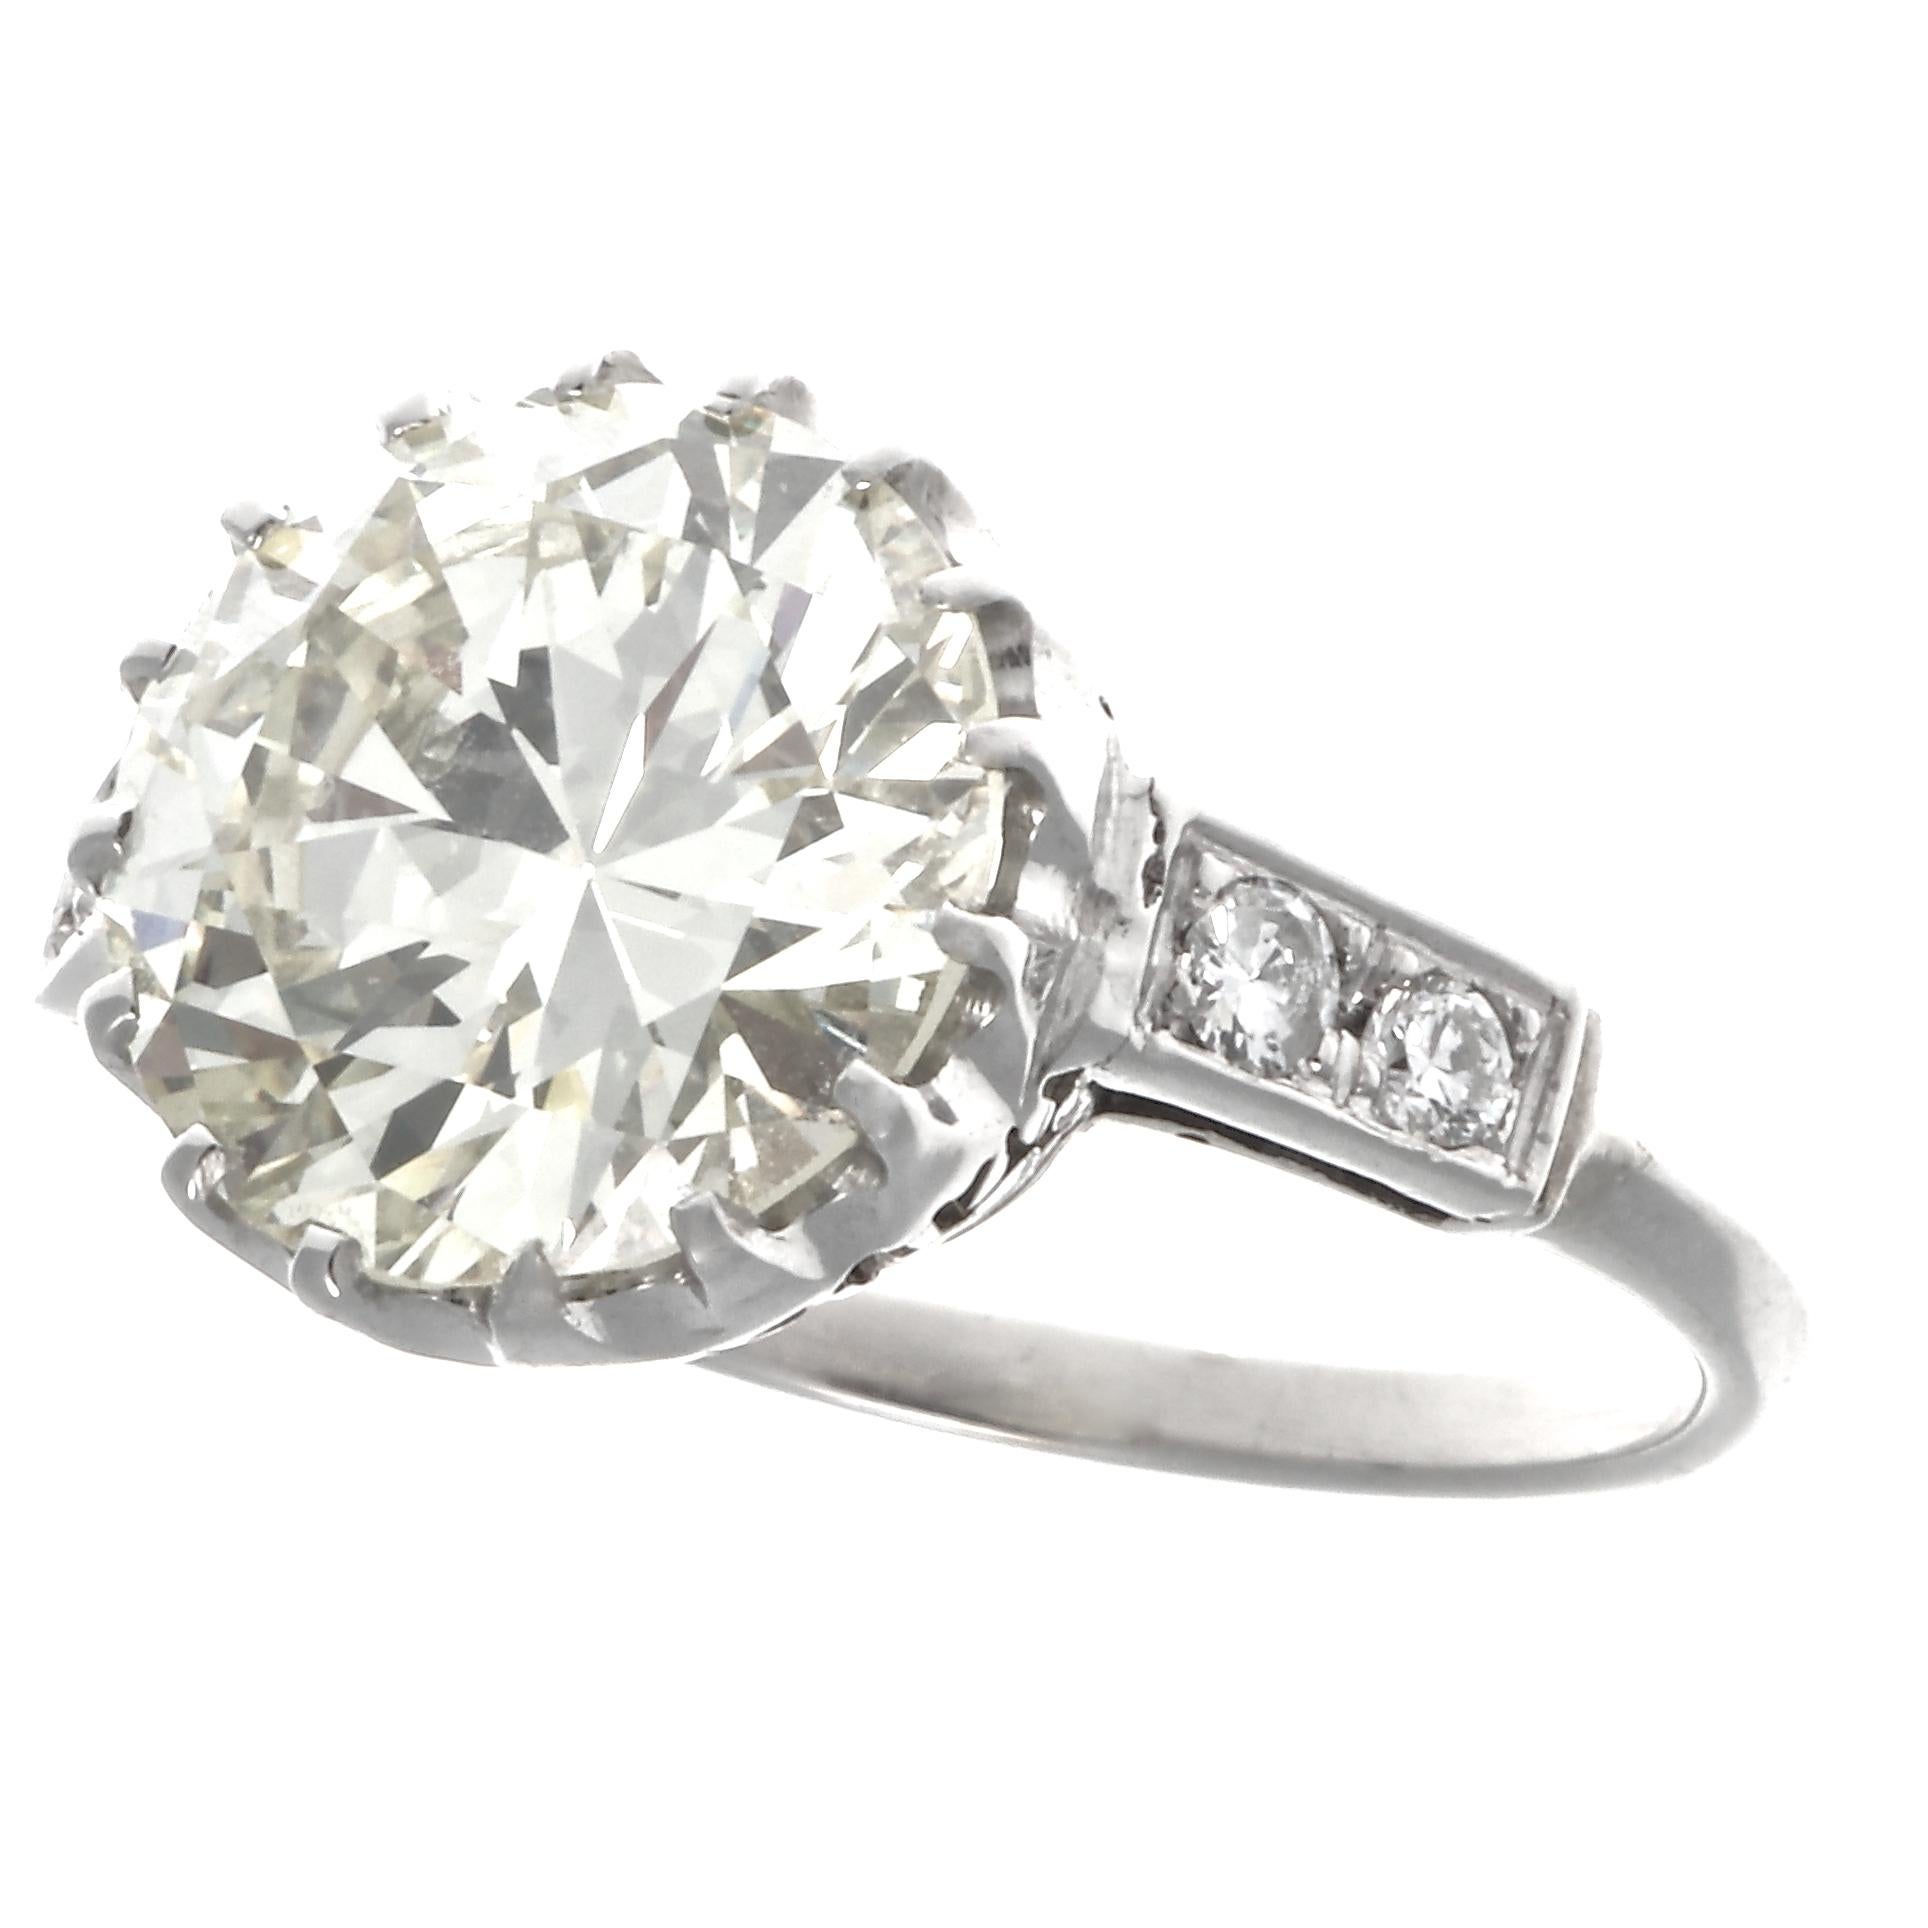 Spectacular low profile platinum engagement ring from the 1950's. Featuring a  3.67 round cut diamond, graded Q-R color, VVS clarity. With 4 round brilliant diamonds graded as F-G color, VS clarity. Size 6 1/2 and comes with complimentary sizing if